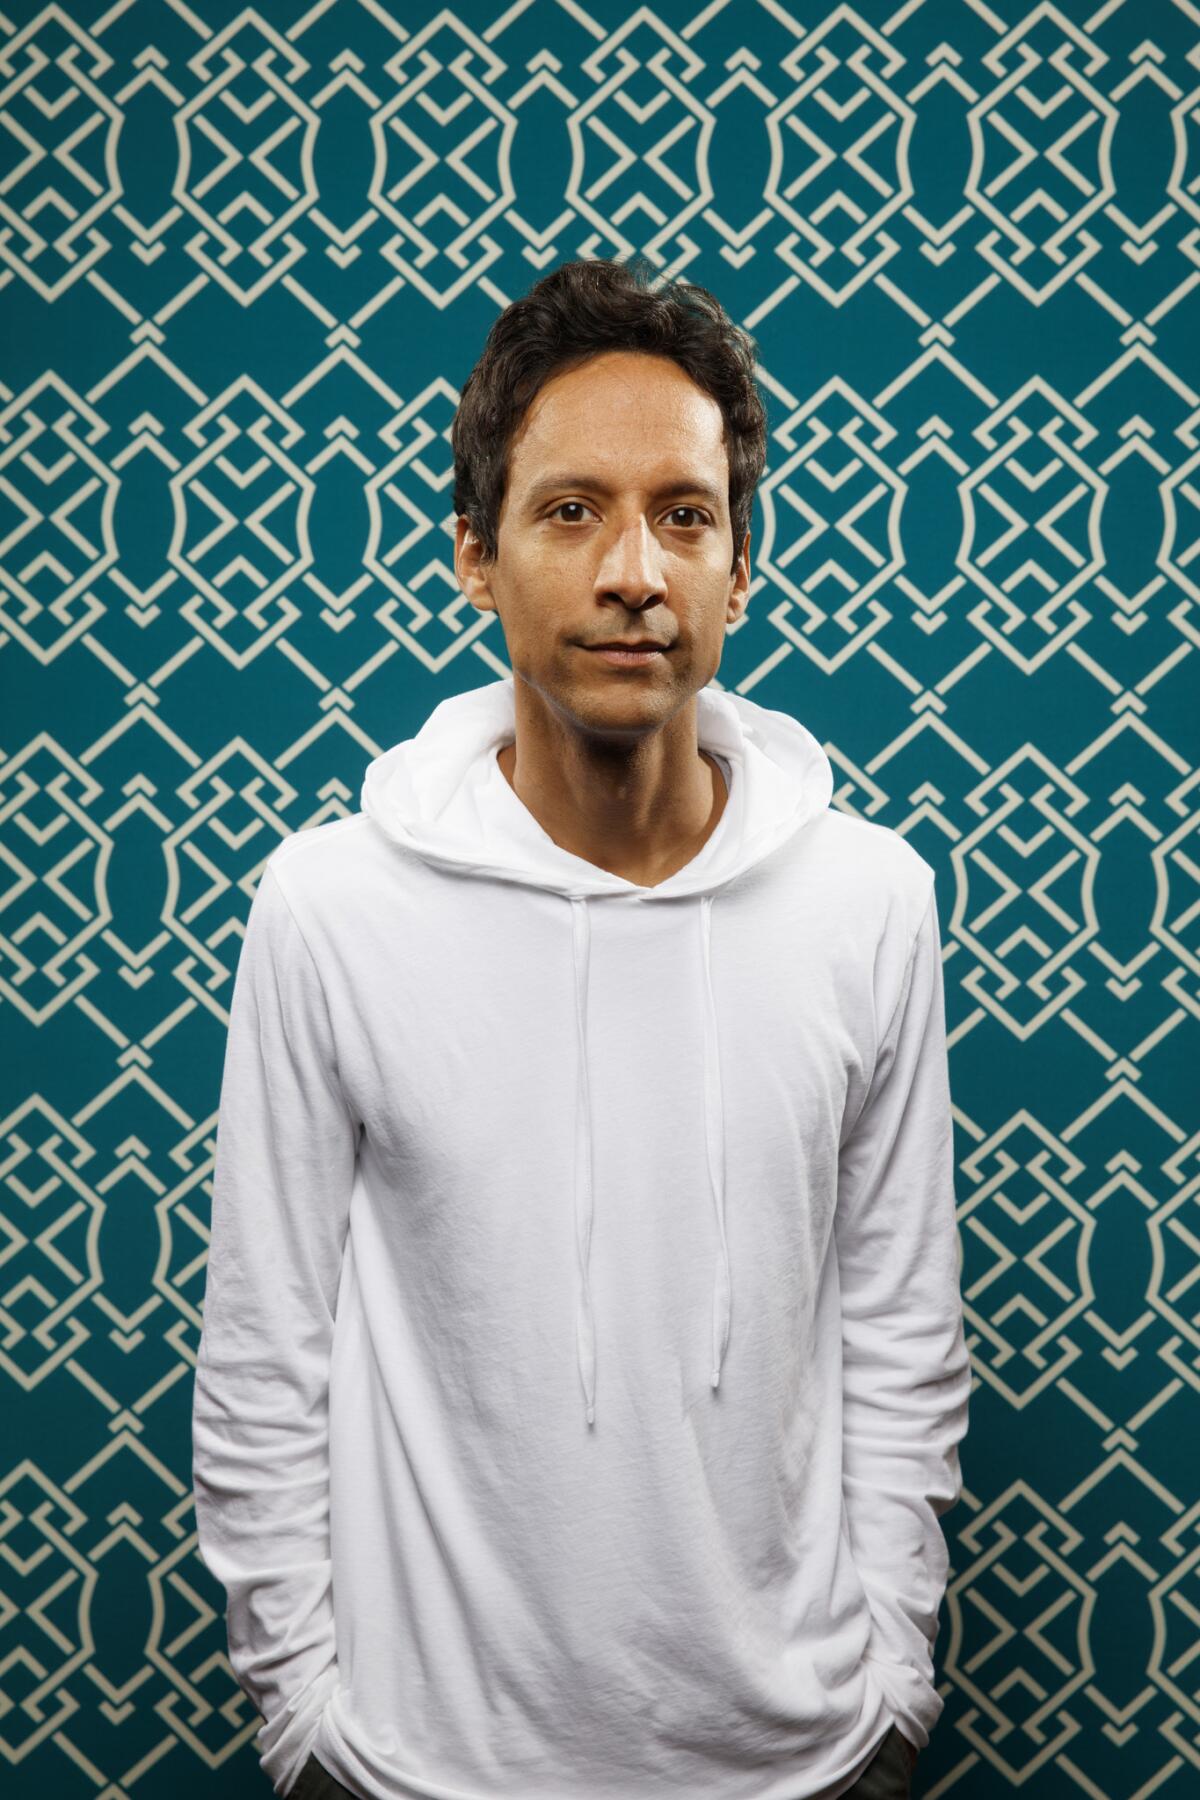 Danny Pudi from the television series "Duck Tales."